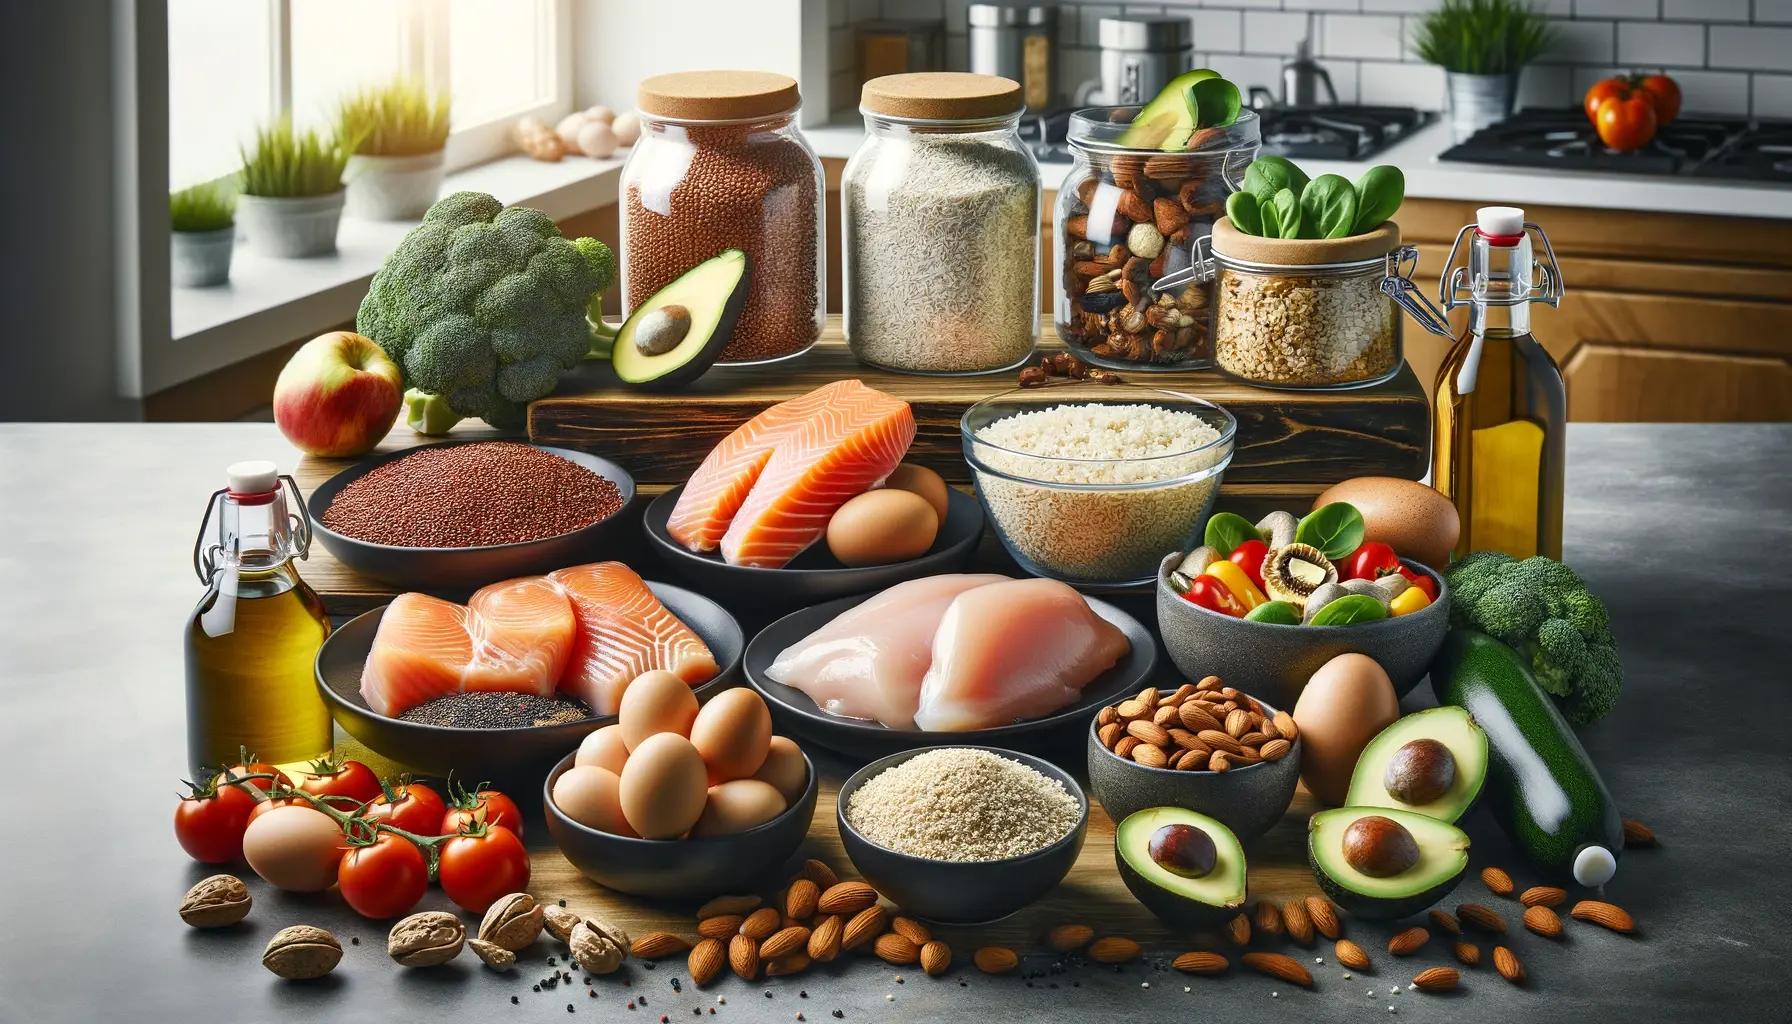 Variety of muscle-building foods including lean proteins, whole grains, and healthy fats arranged aesthetically on a modern kitchen countertop